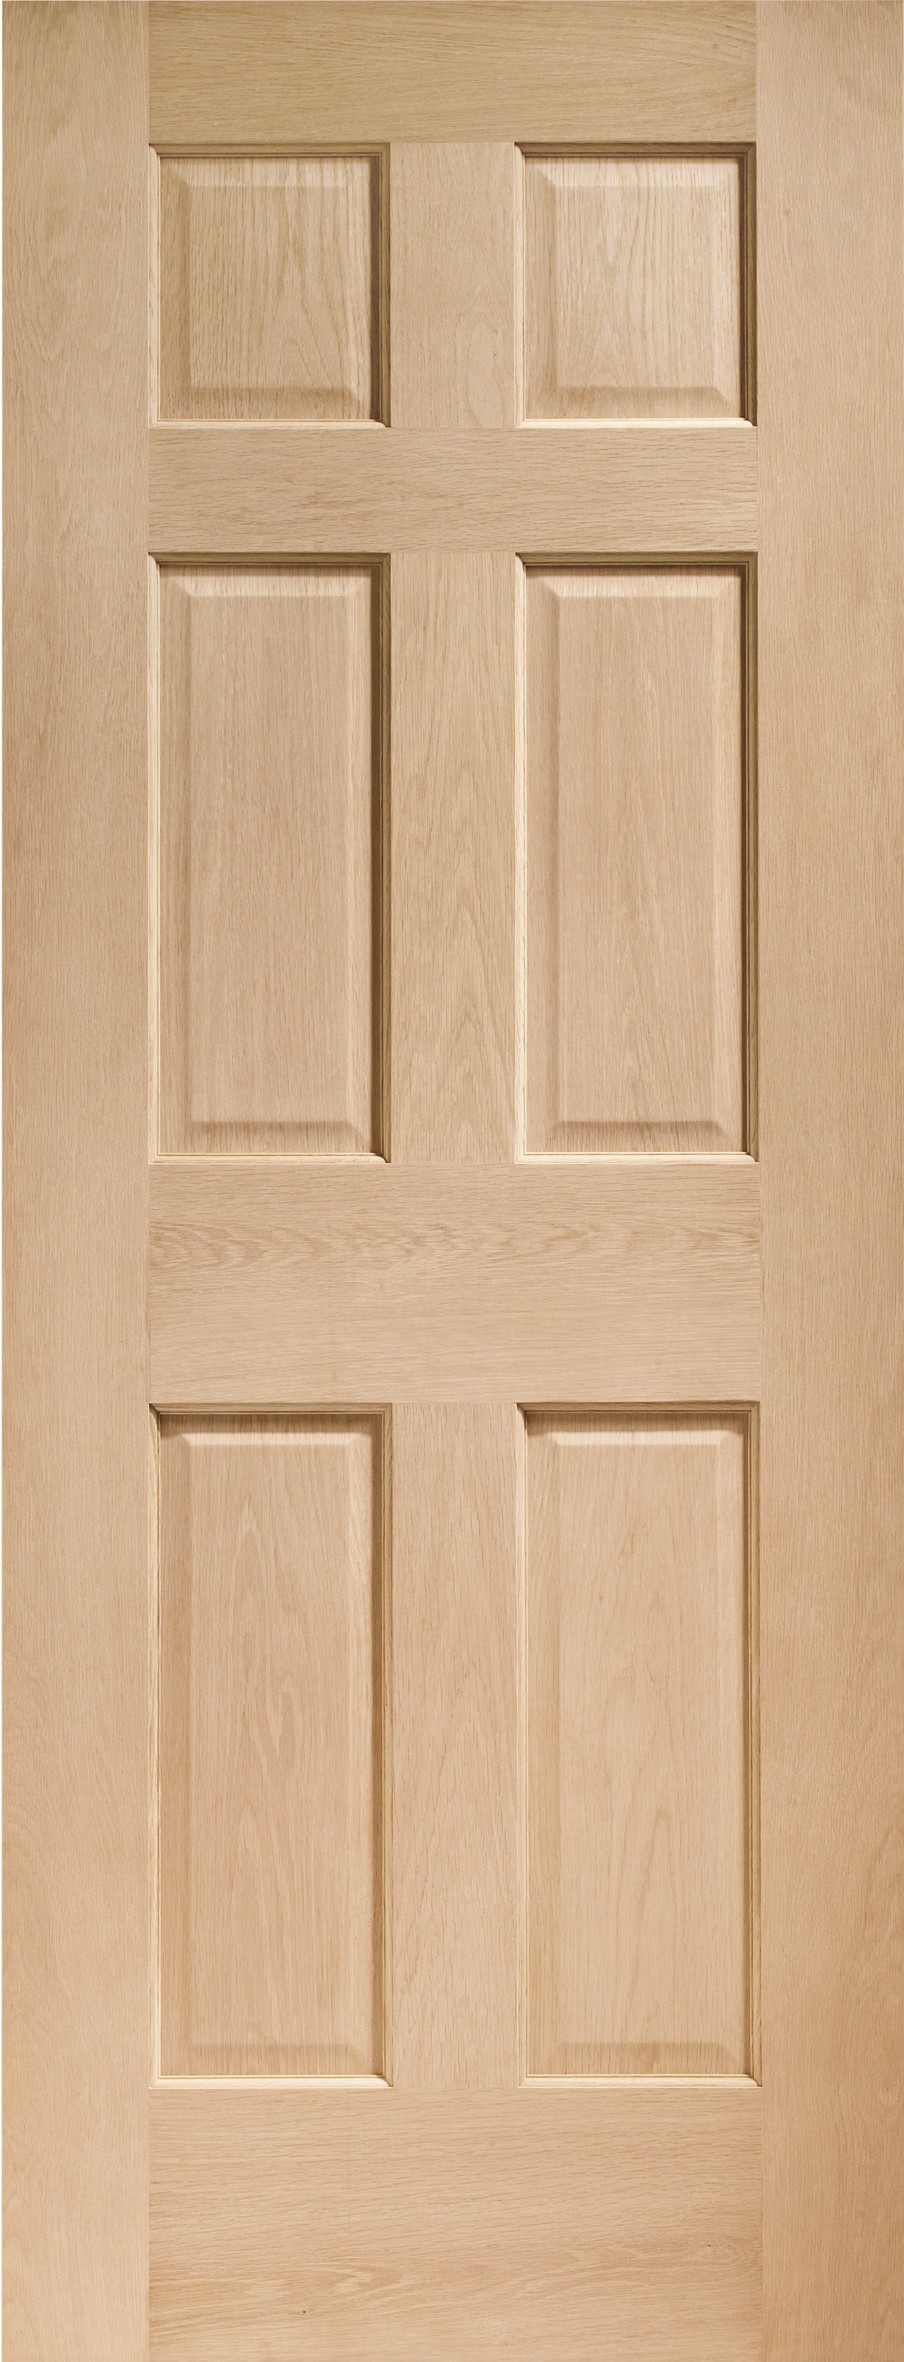 XL JOINERY DOORS -  INTOCOL33  Internal Oak Colonial 6 Panel  INTOCOL33